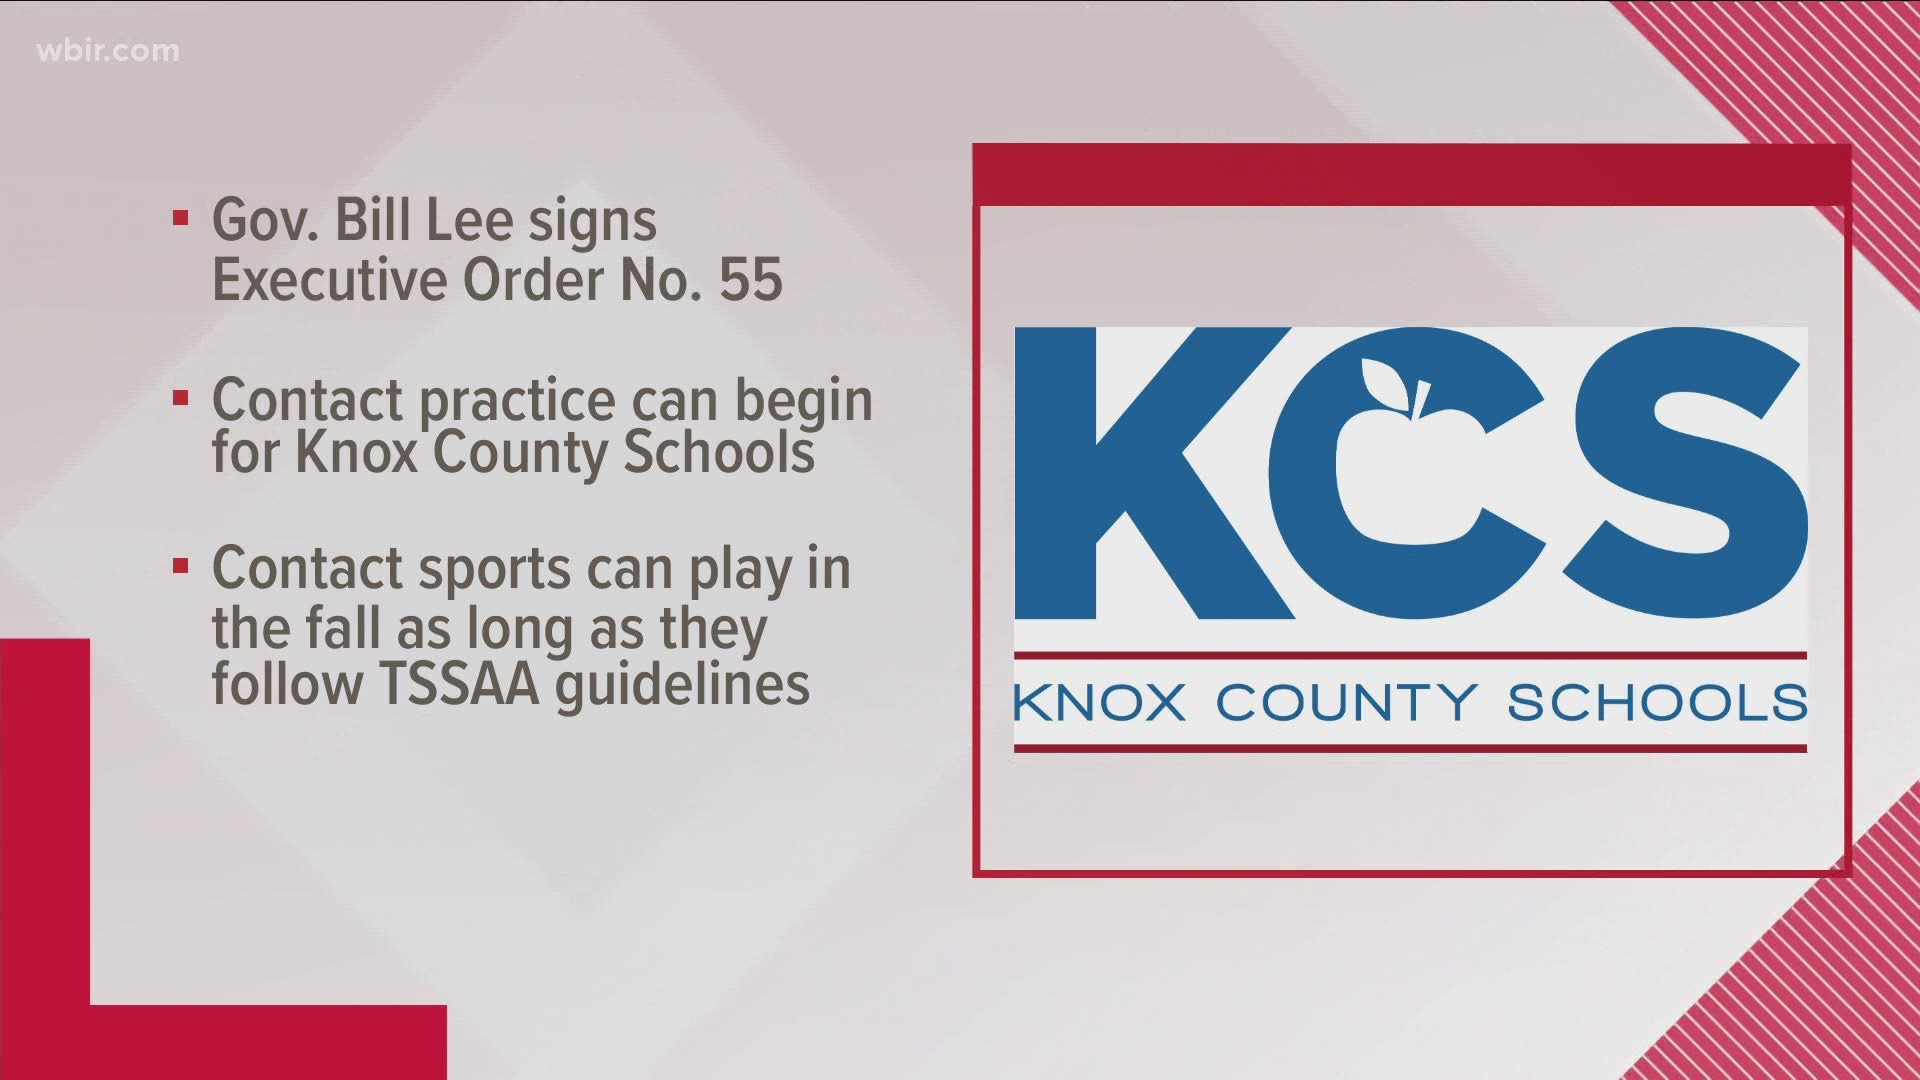 Gov. Bill Lee signs Executive Order No. 55, allowing contact sports to practice and compete this fall.